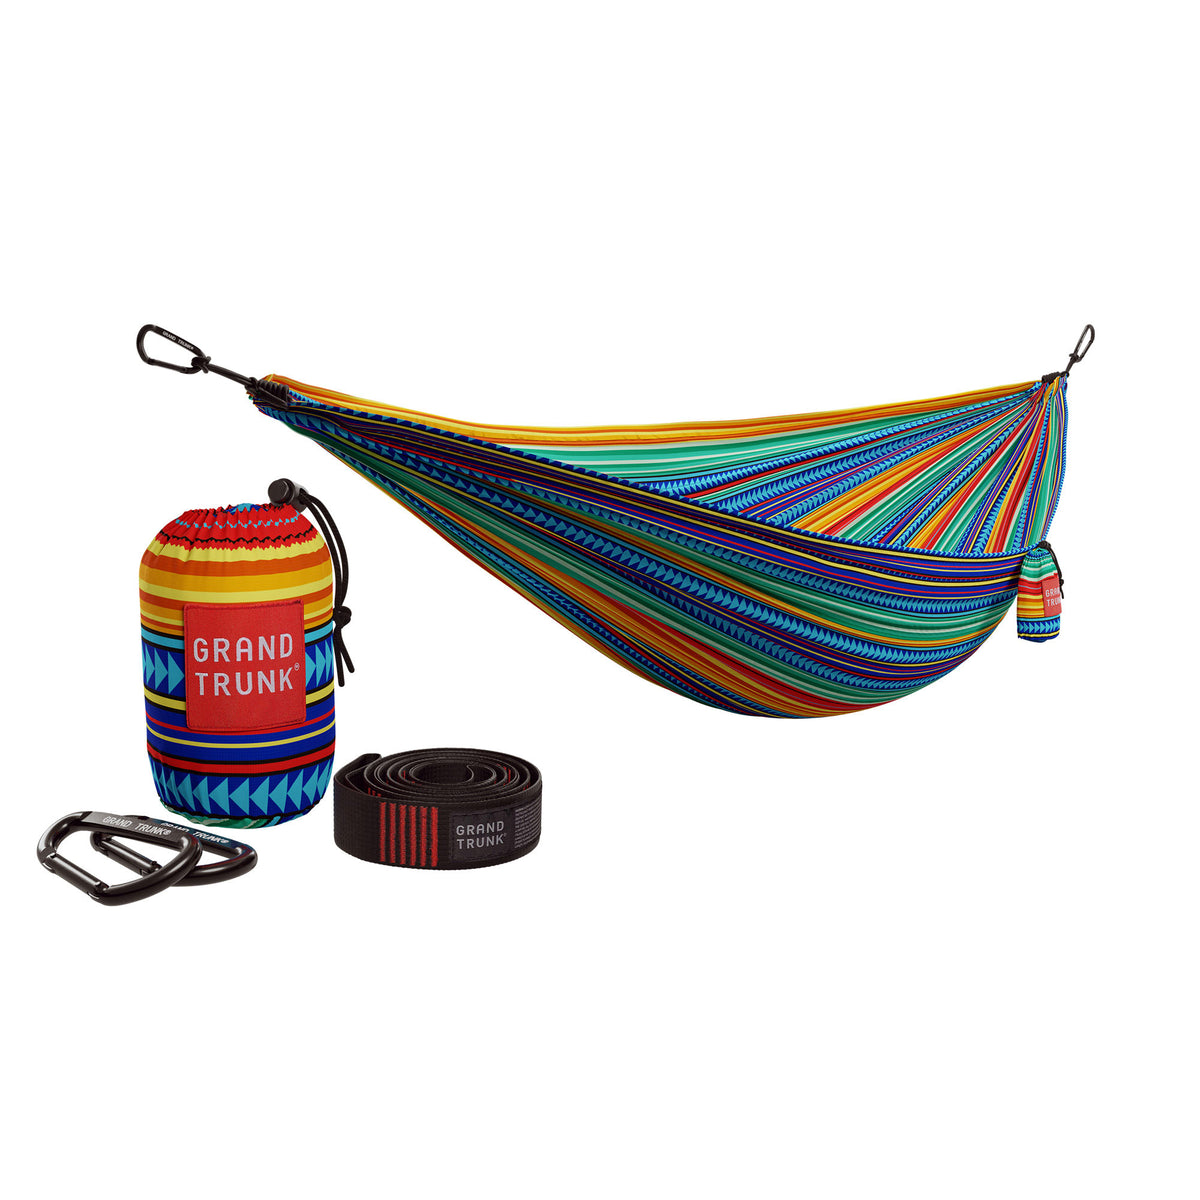 Buy Lux Classic Trunk (Pack of 4) 100 cm Multicolour at